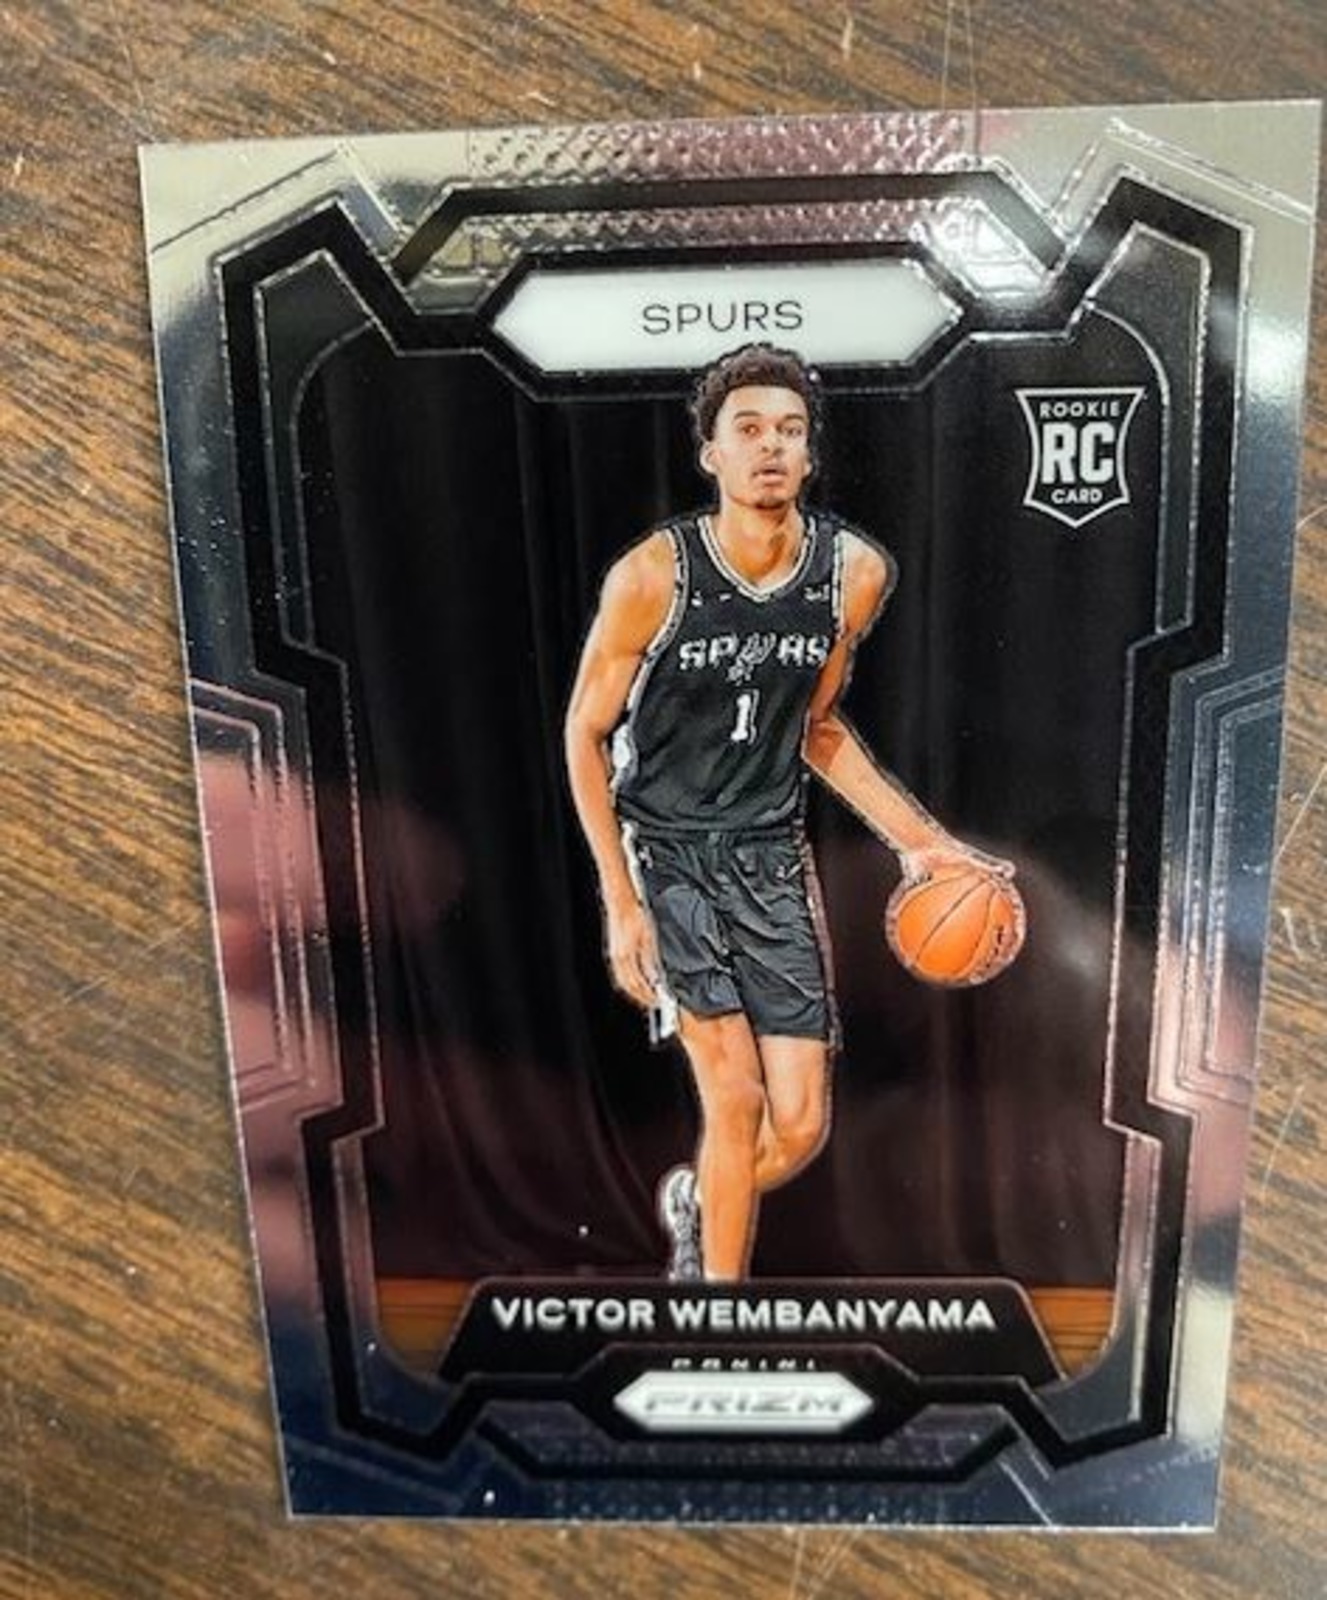 Fake Victor Wembanyama rookie card seized by U.S. Customs and Border Protection